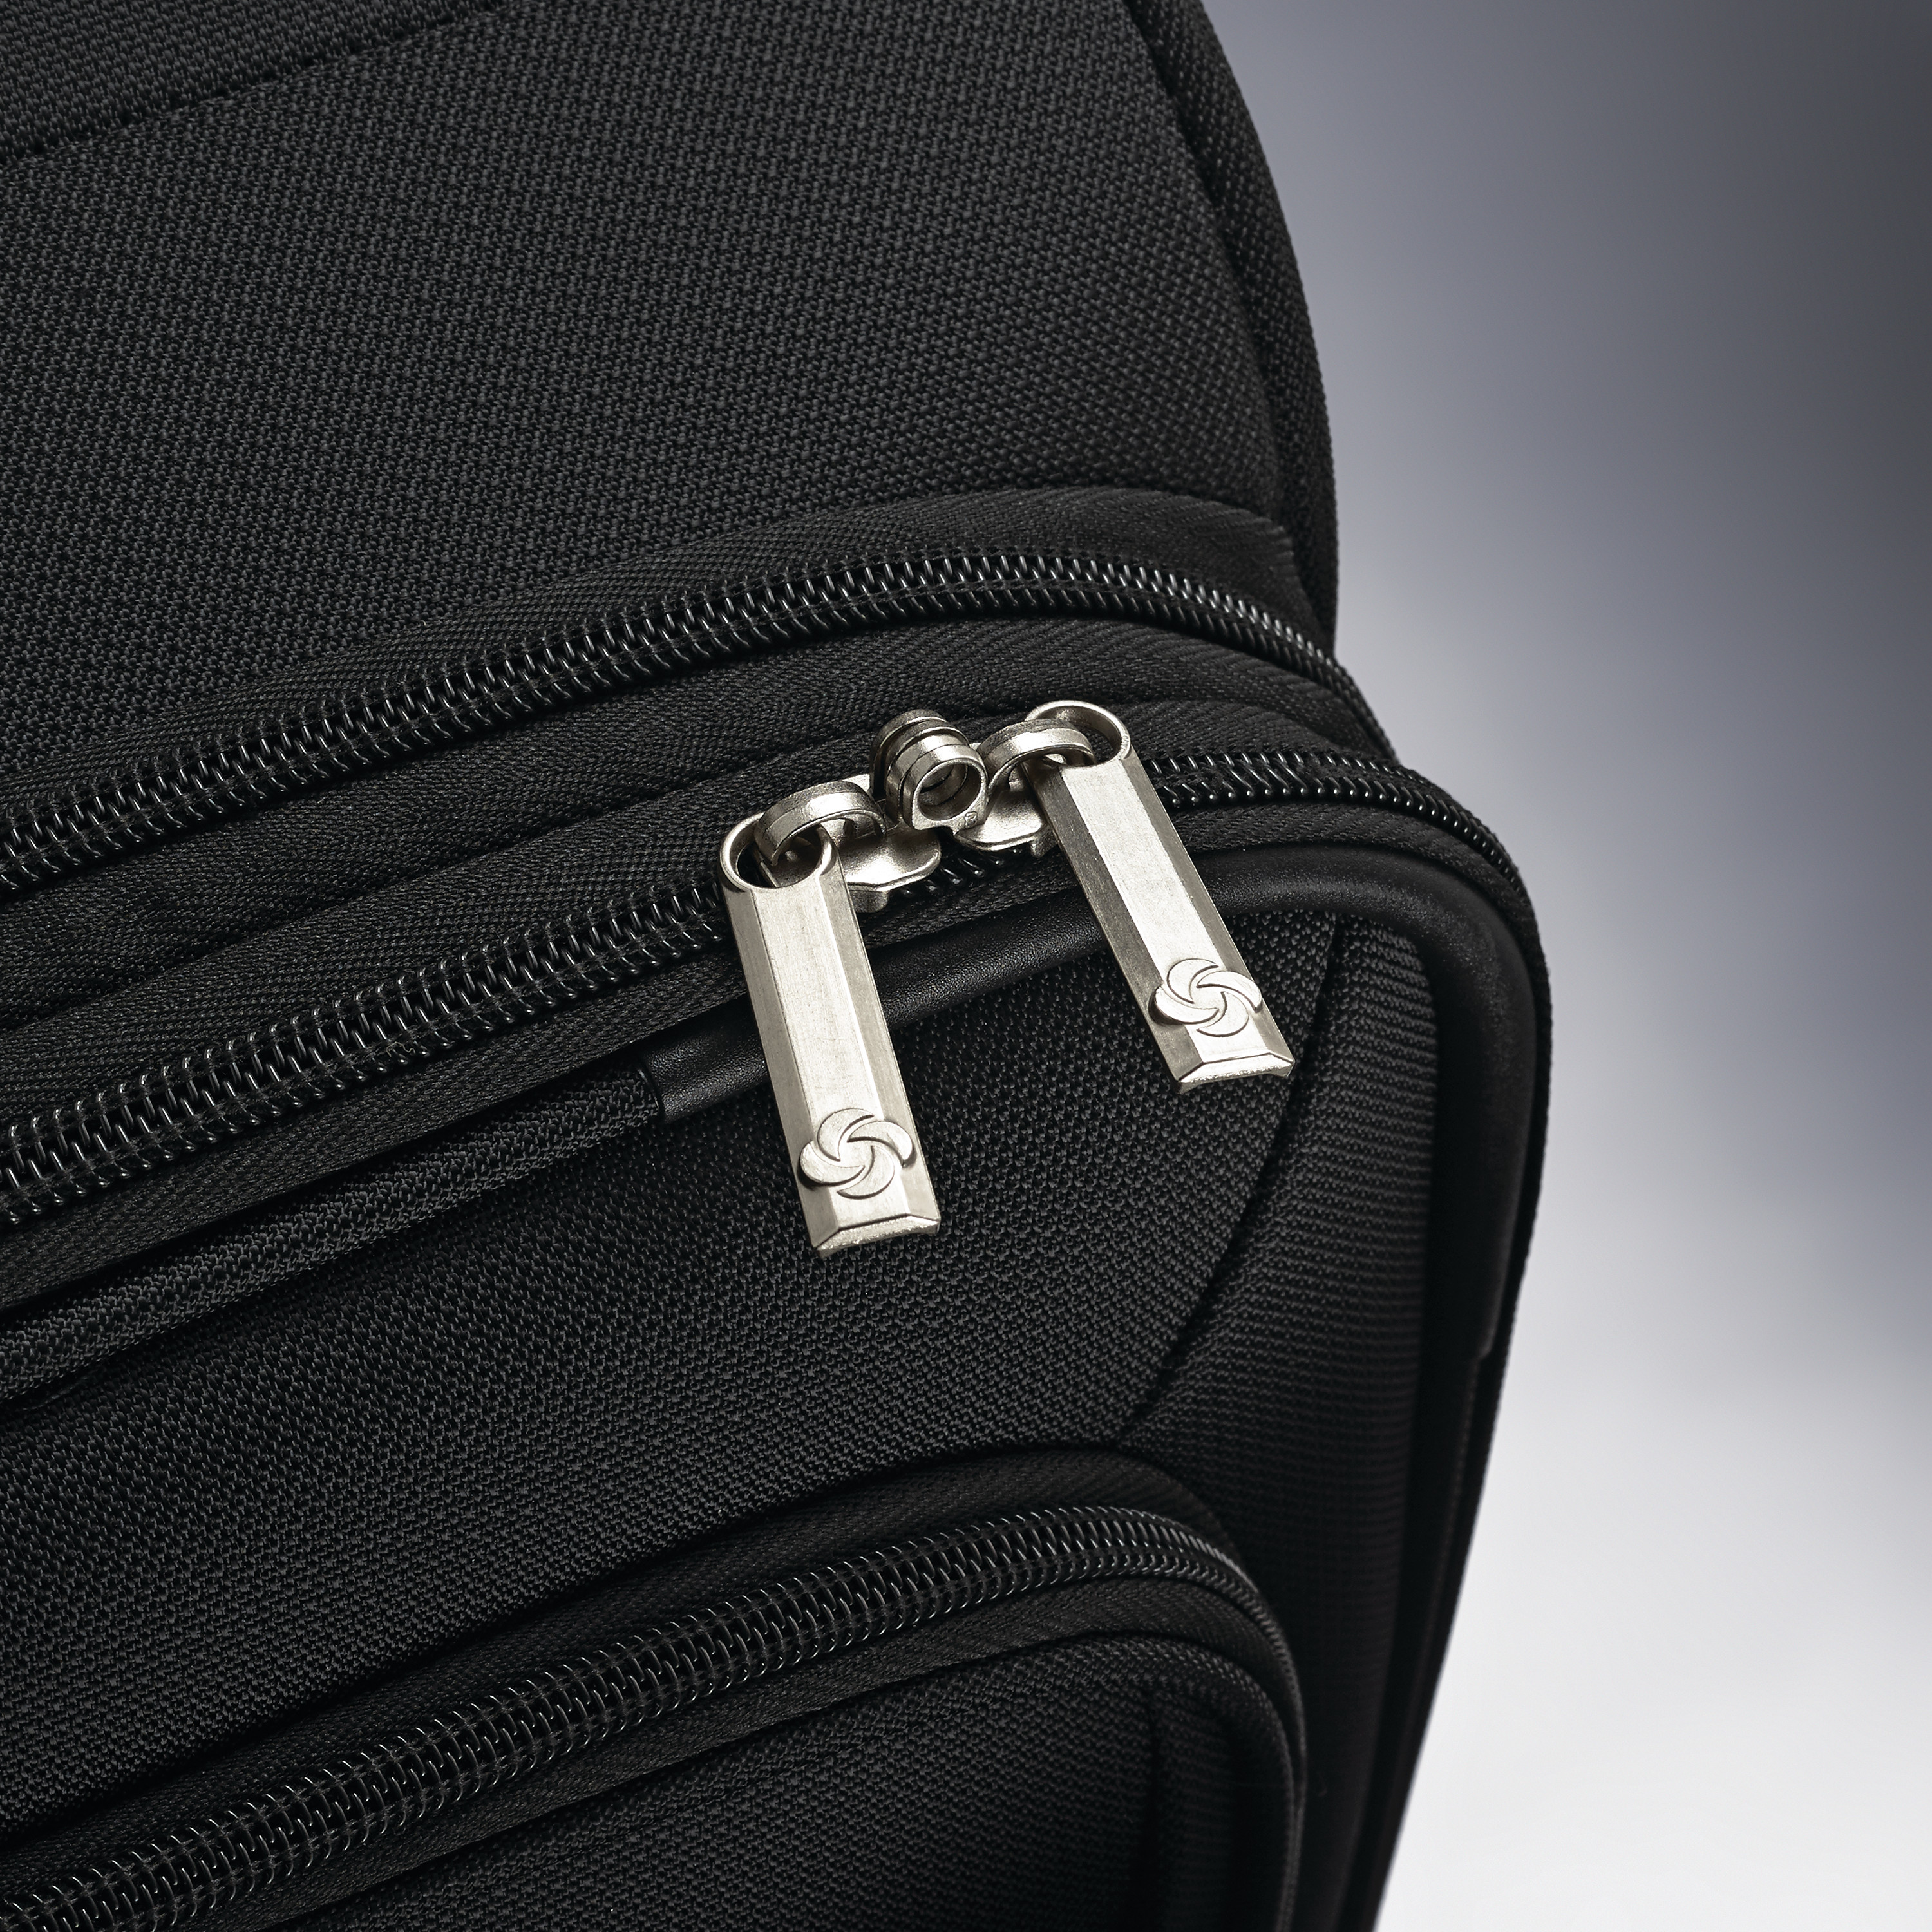 Samsonite Ascella I Carry-On Spinner - Luggage